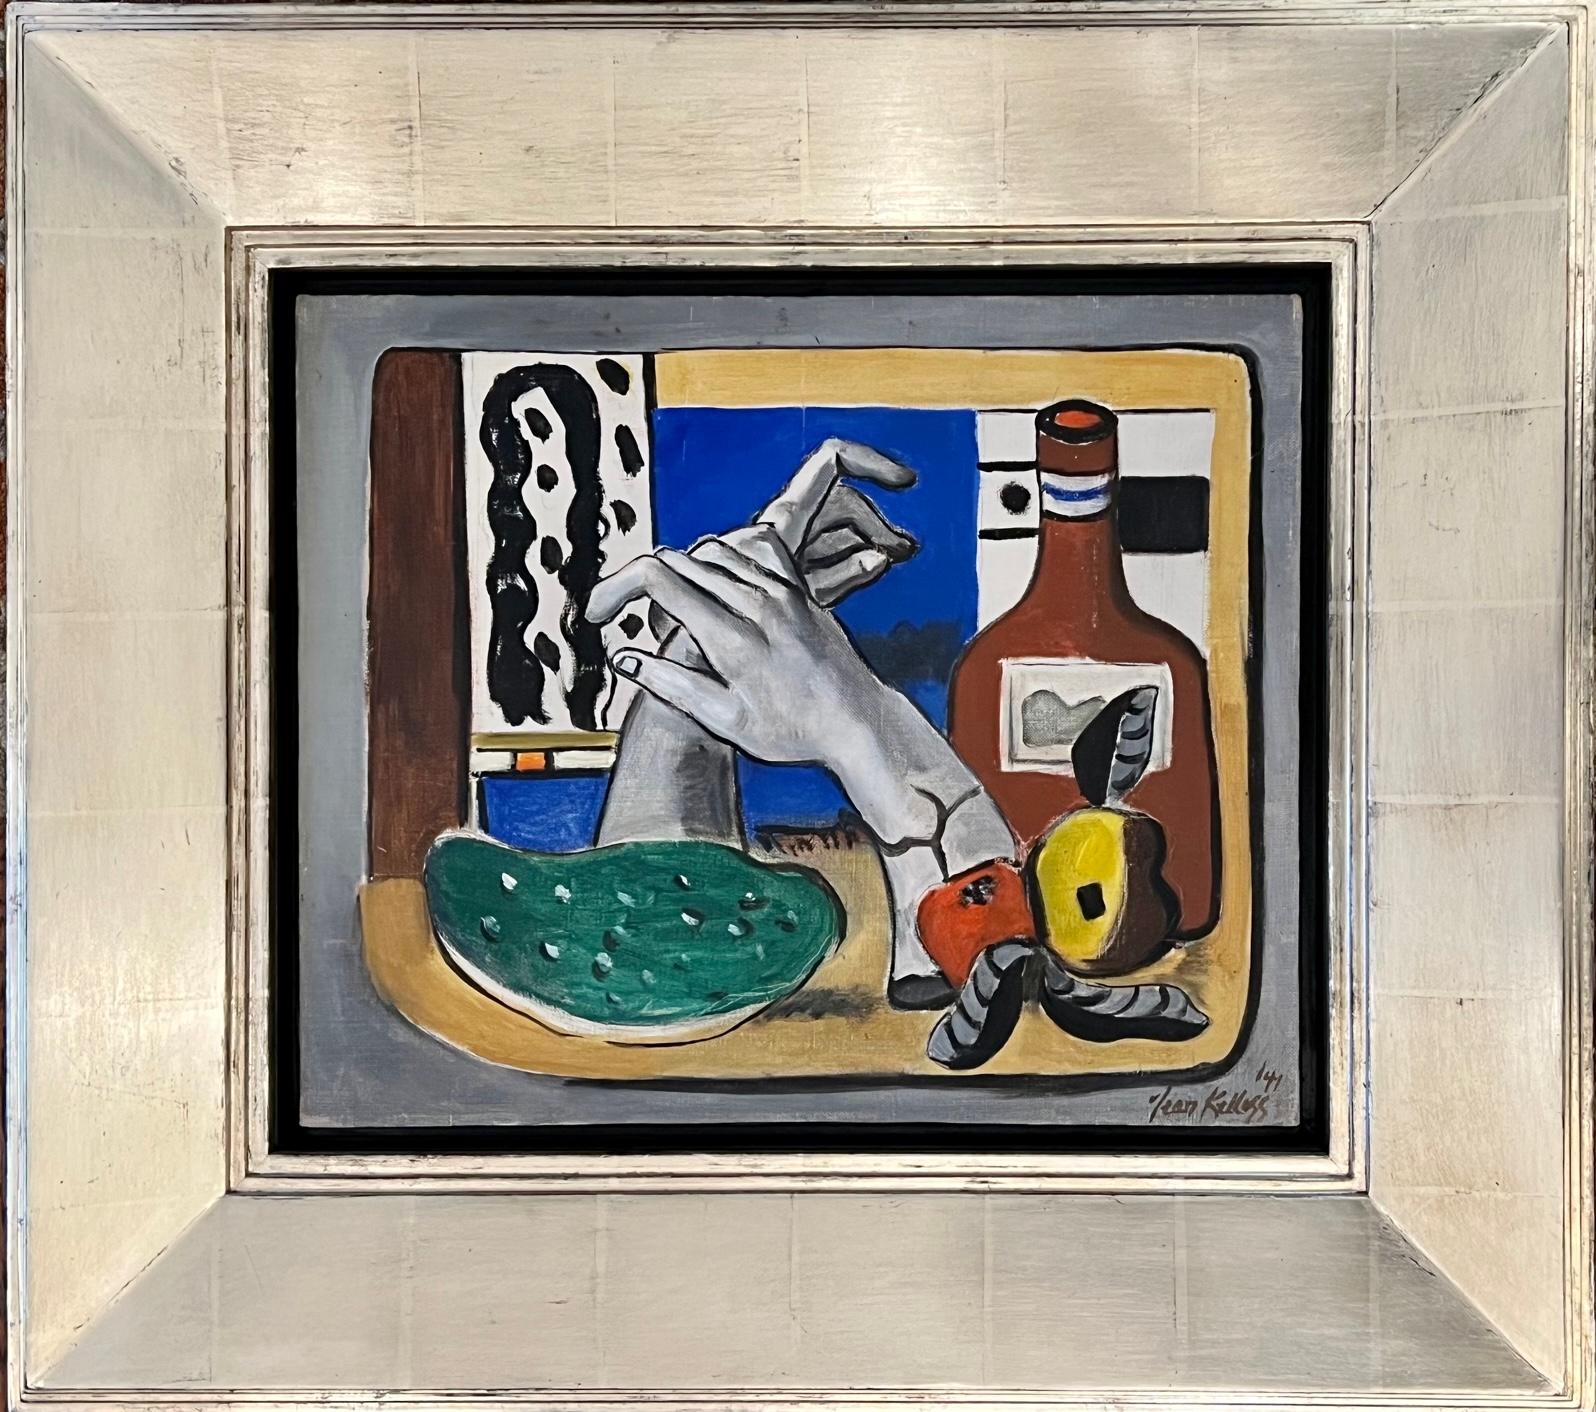 Homage to Leger - American Modern Painting by Jean Kellogg